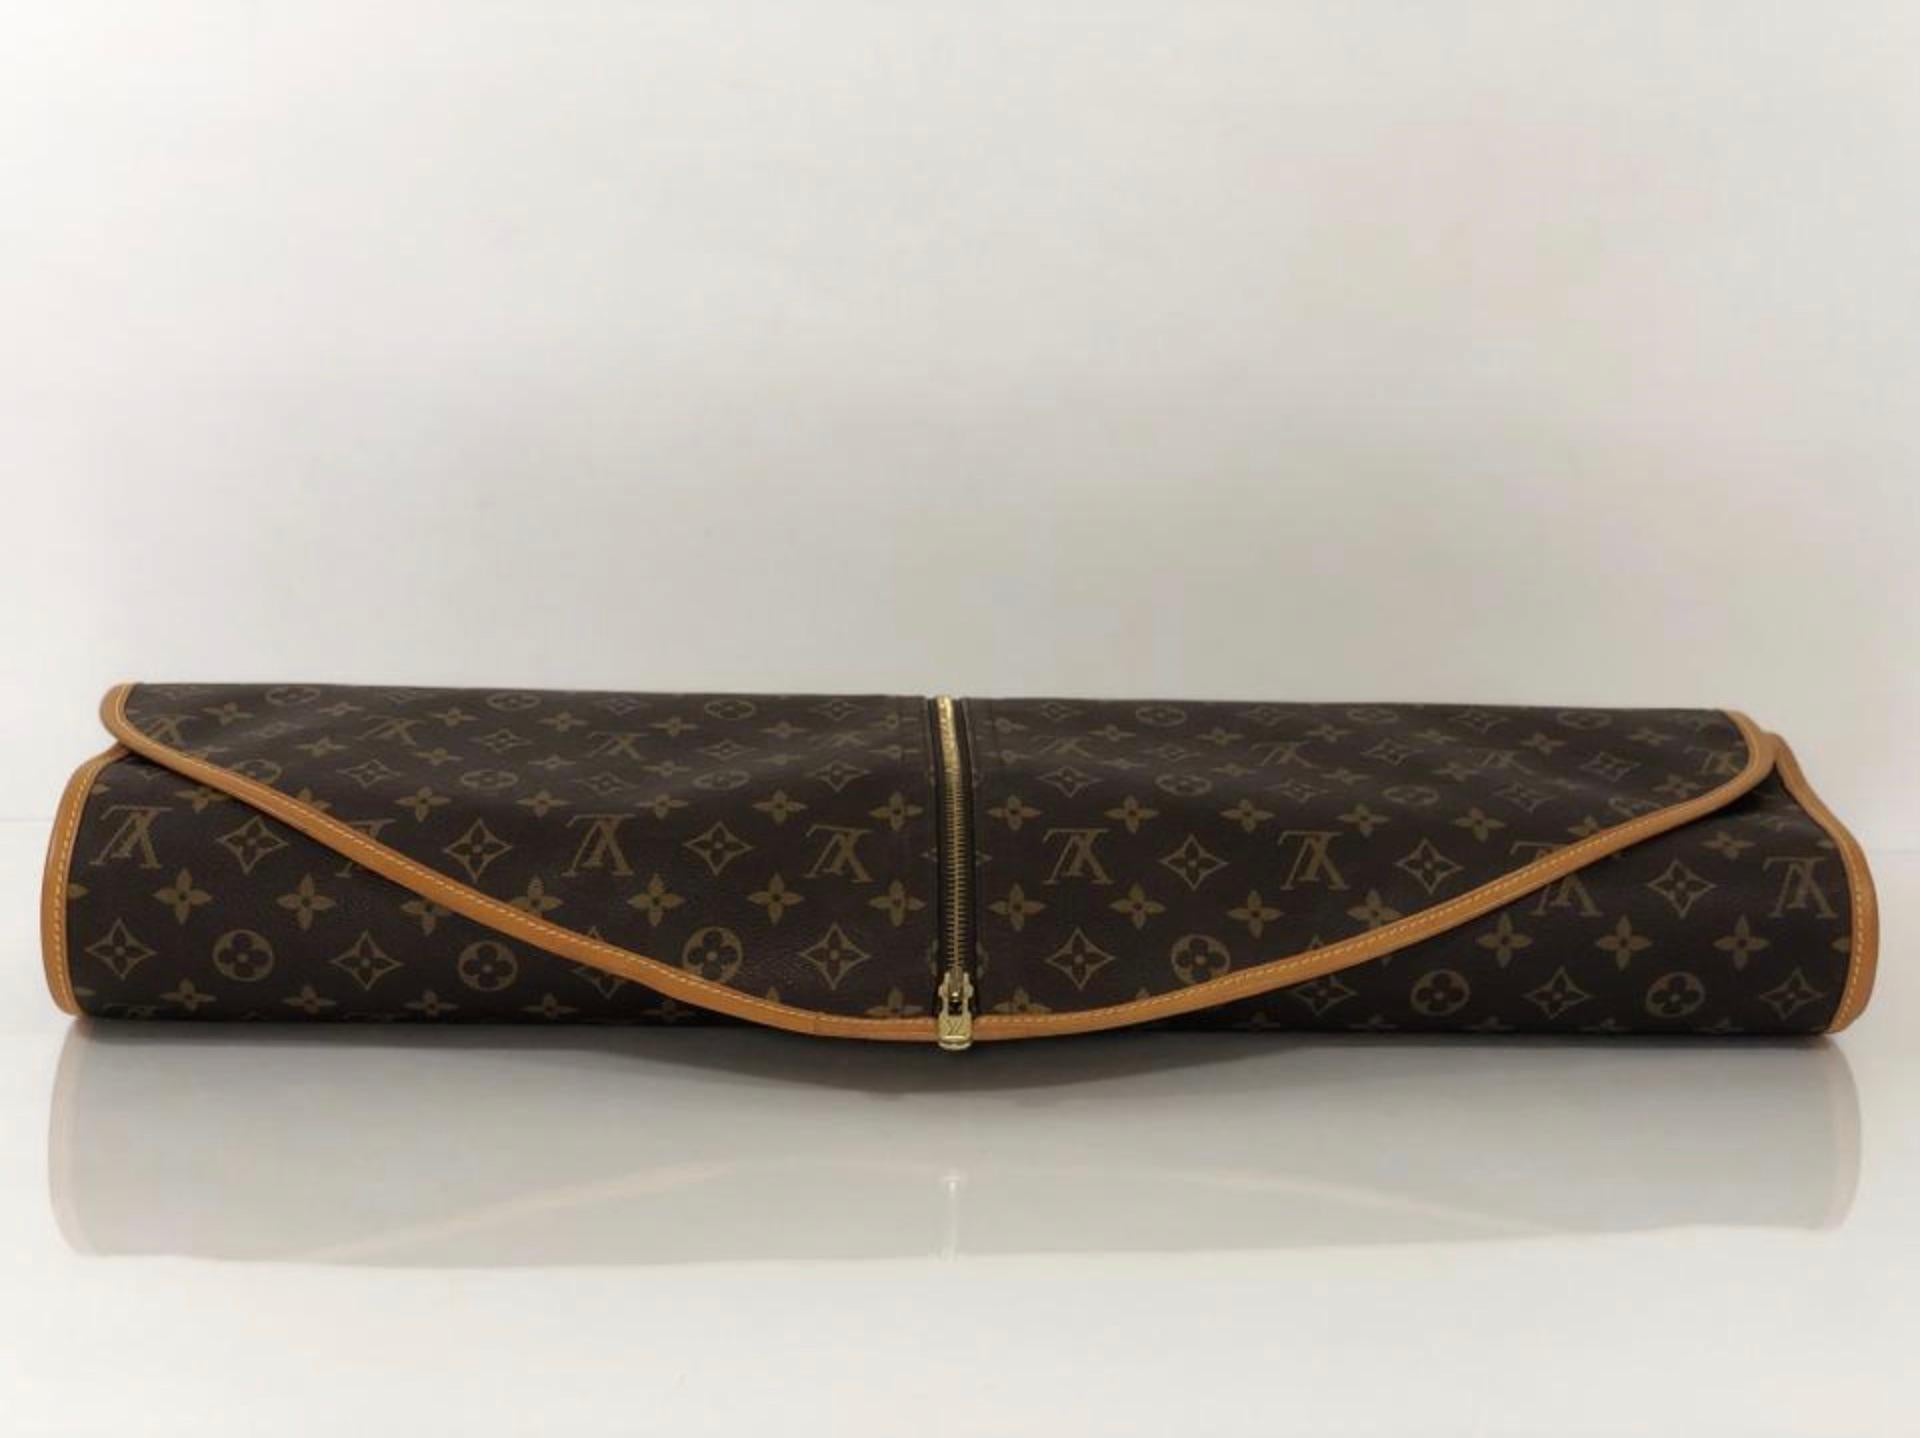  Louis Vuitton Monogram Garment Cover (Canvas on both sides) In Good Condition For Sale In Saint Charles, IL